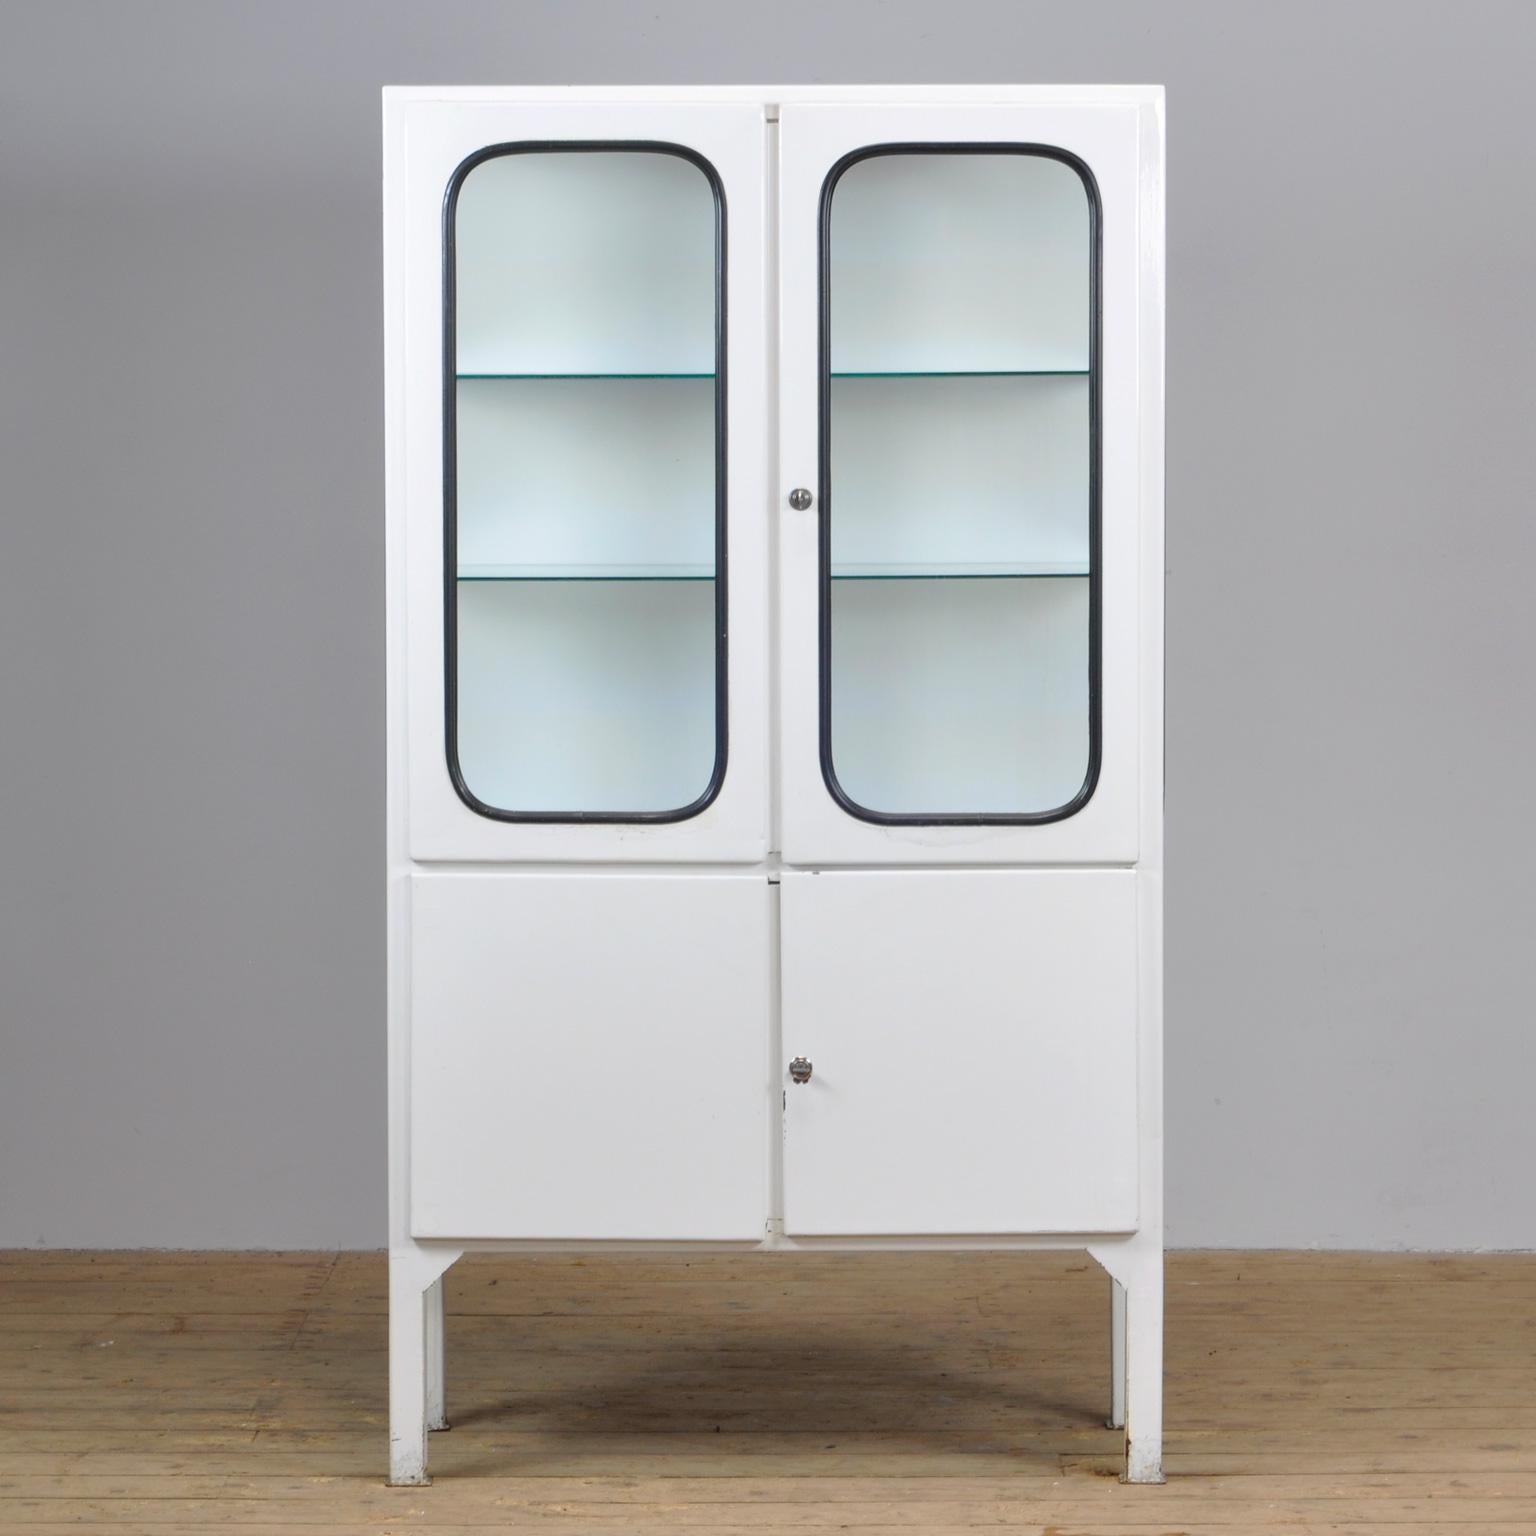 This medical cabinet was designed in the 1970s and was produced circa 1975 in Hungary. It is made from iron and glass, and the glass is held by a black rubber strip. The cabinet features two adjustable glass shelves and functioning locks.